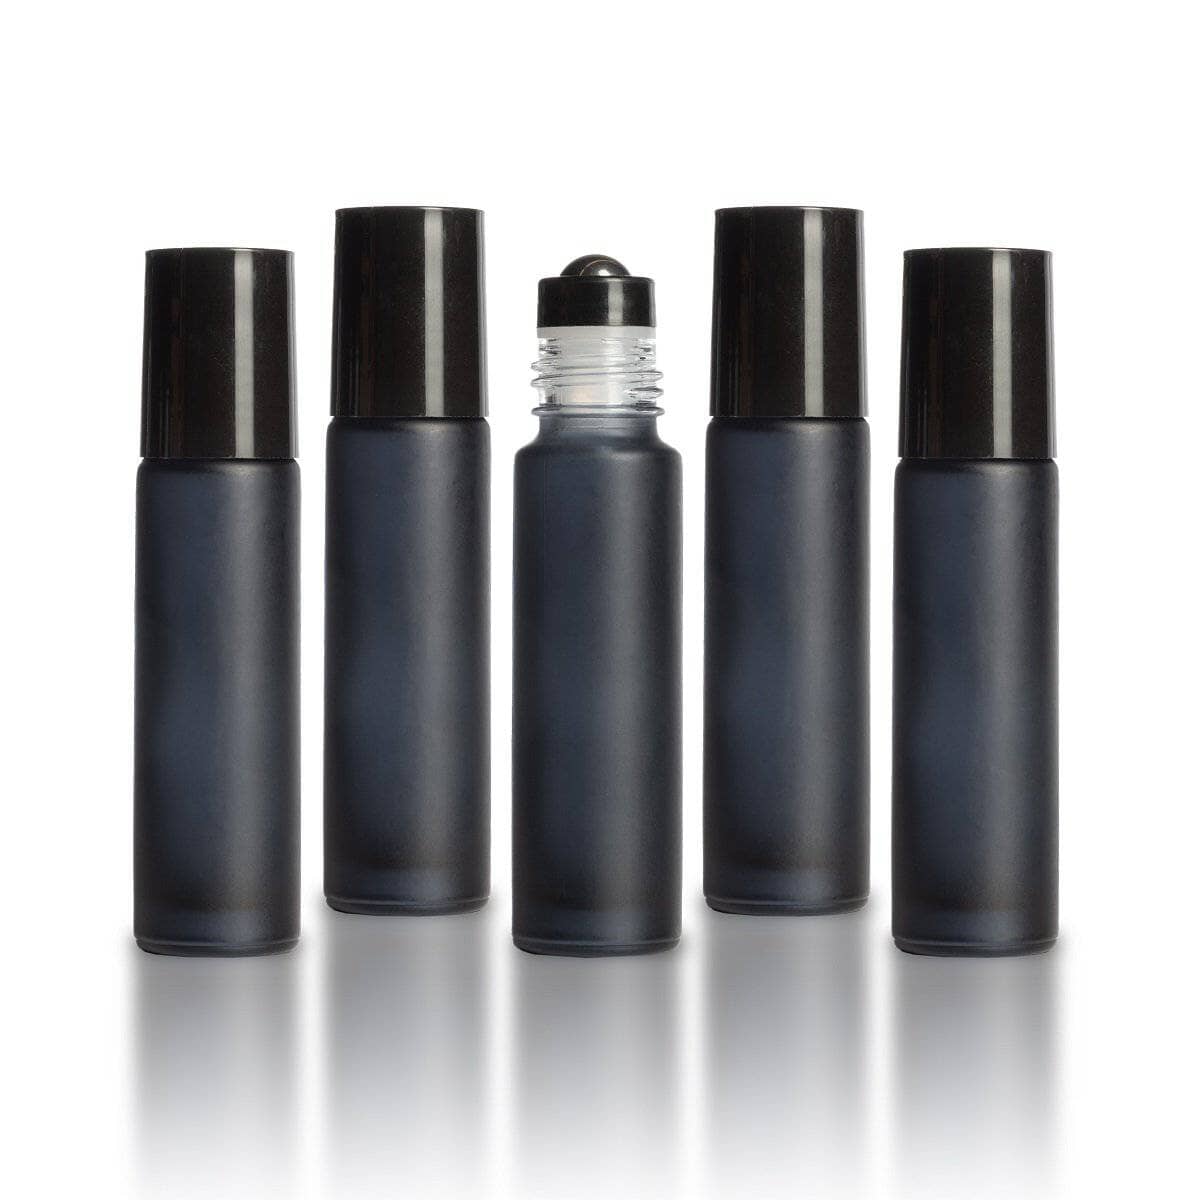 10 ml Black Frosted Bottles with Leak Guard™ Rollers (Pack of 5)